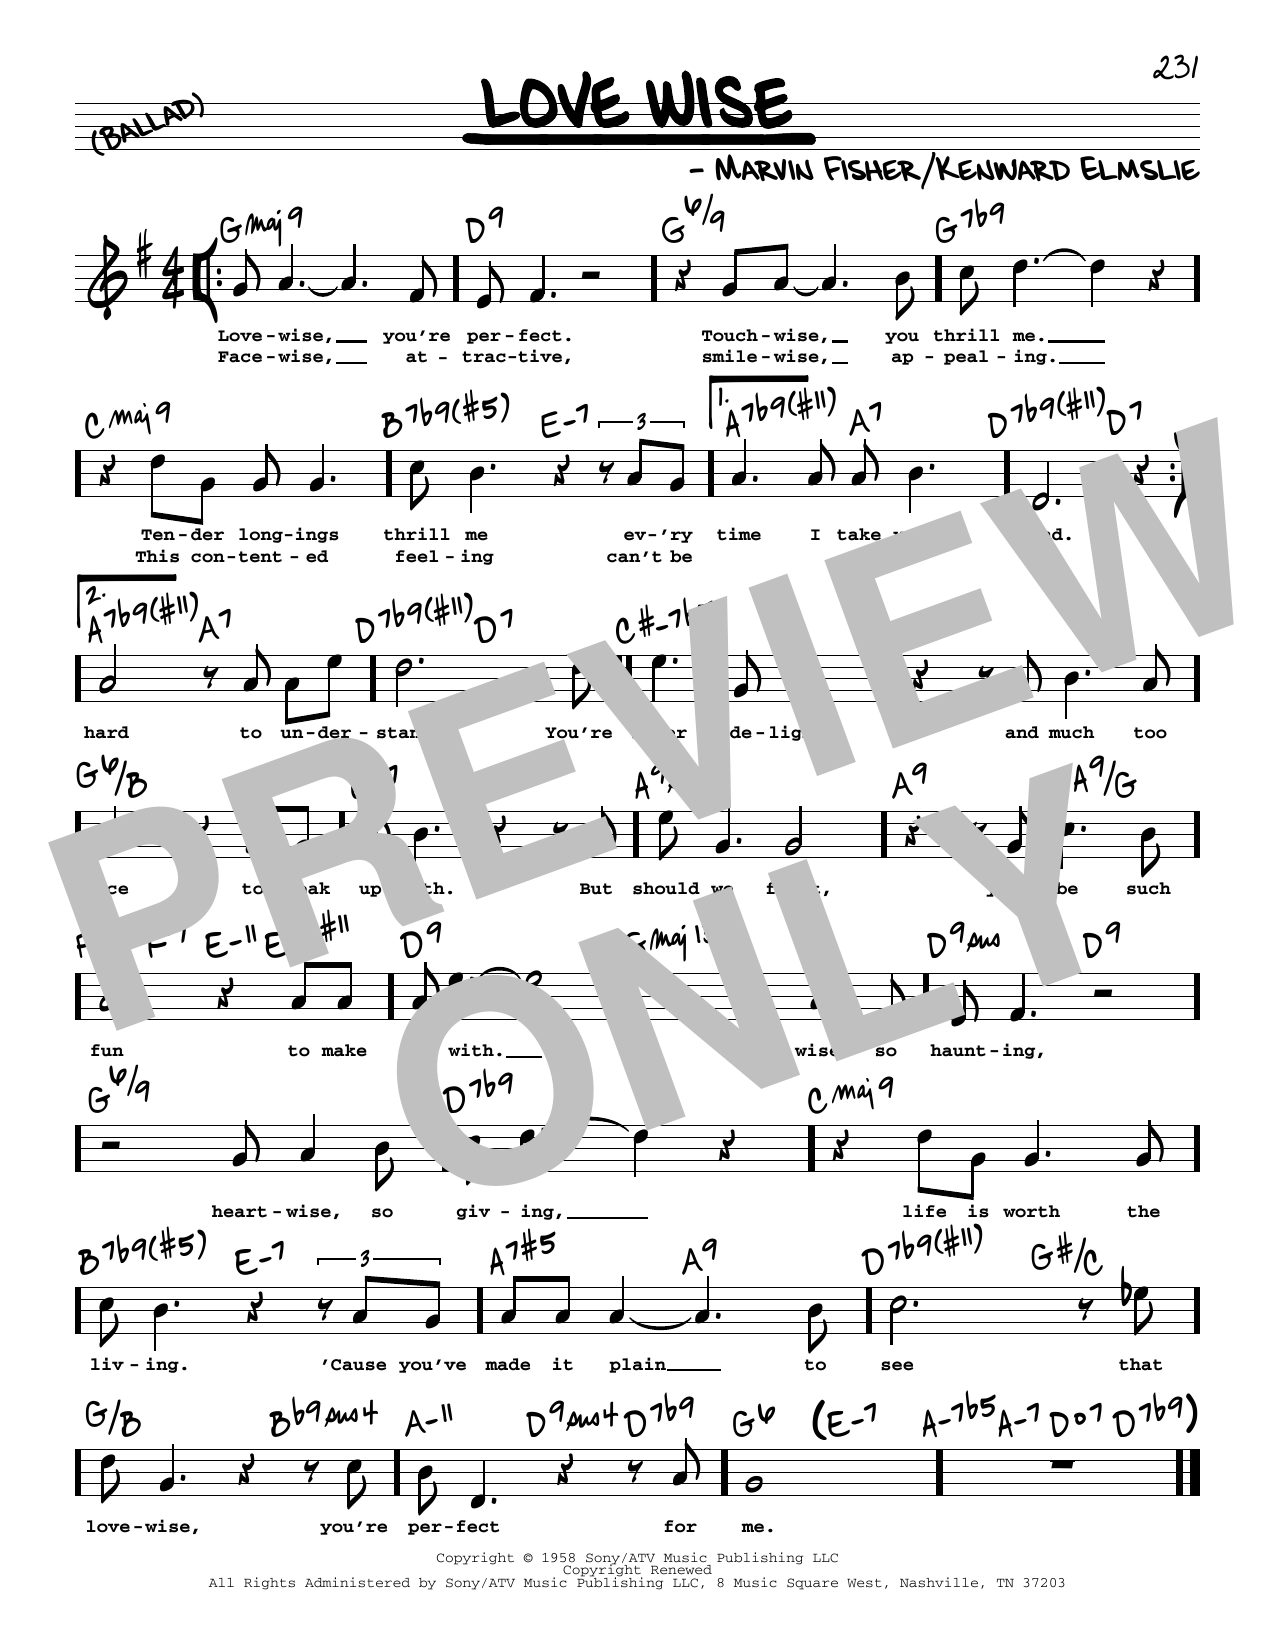 Download Marvin Fisher Love Wise (High Voice) Sheet Music